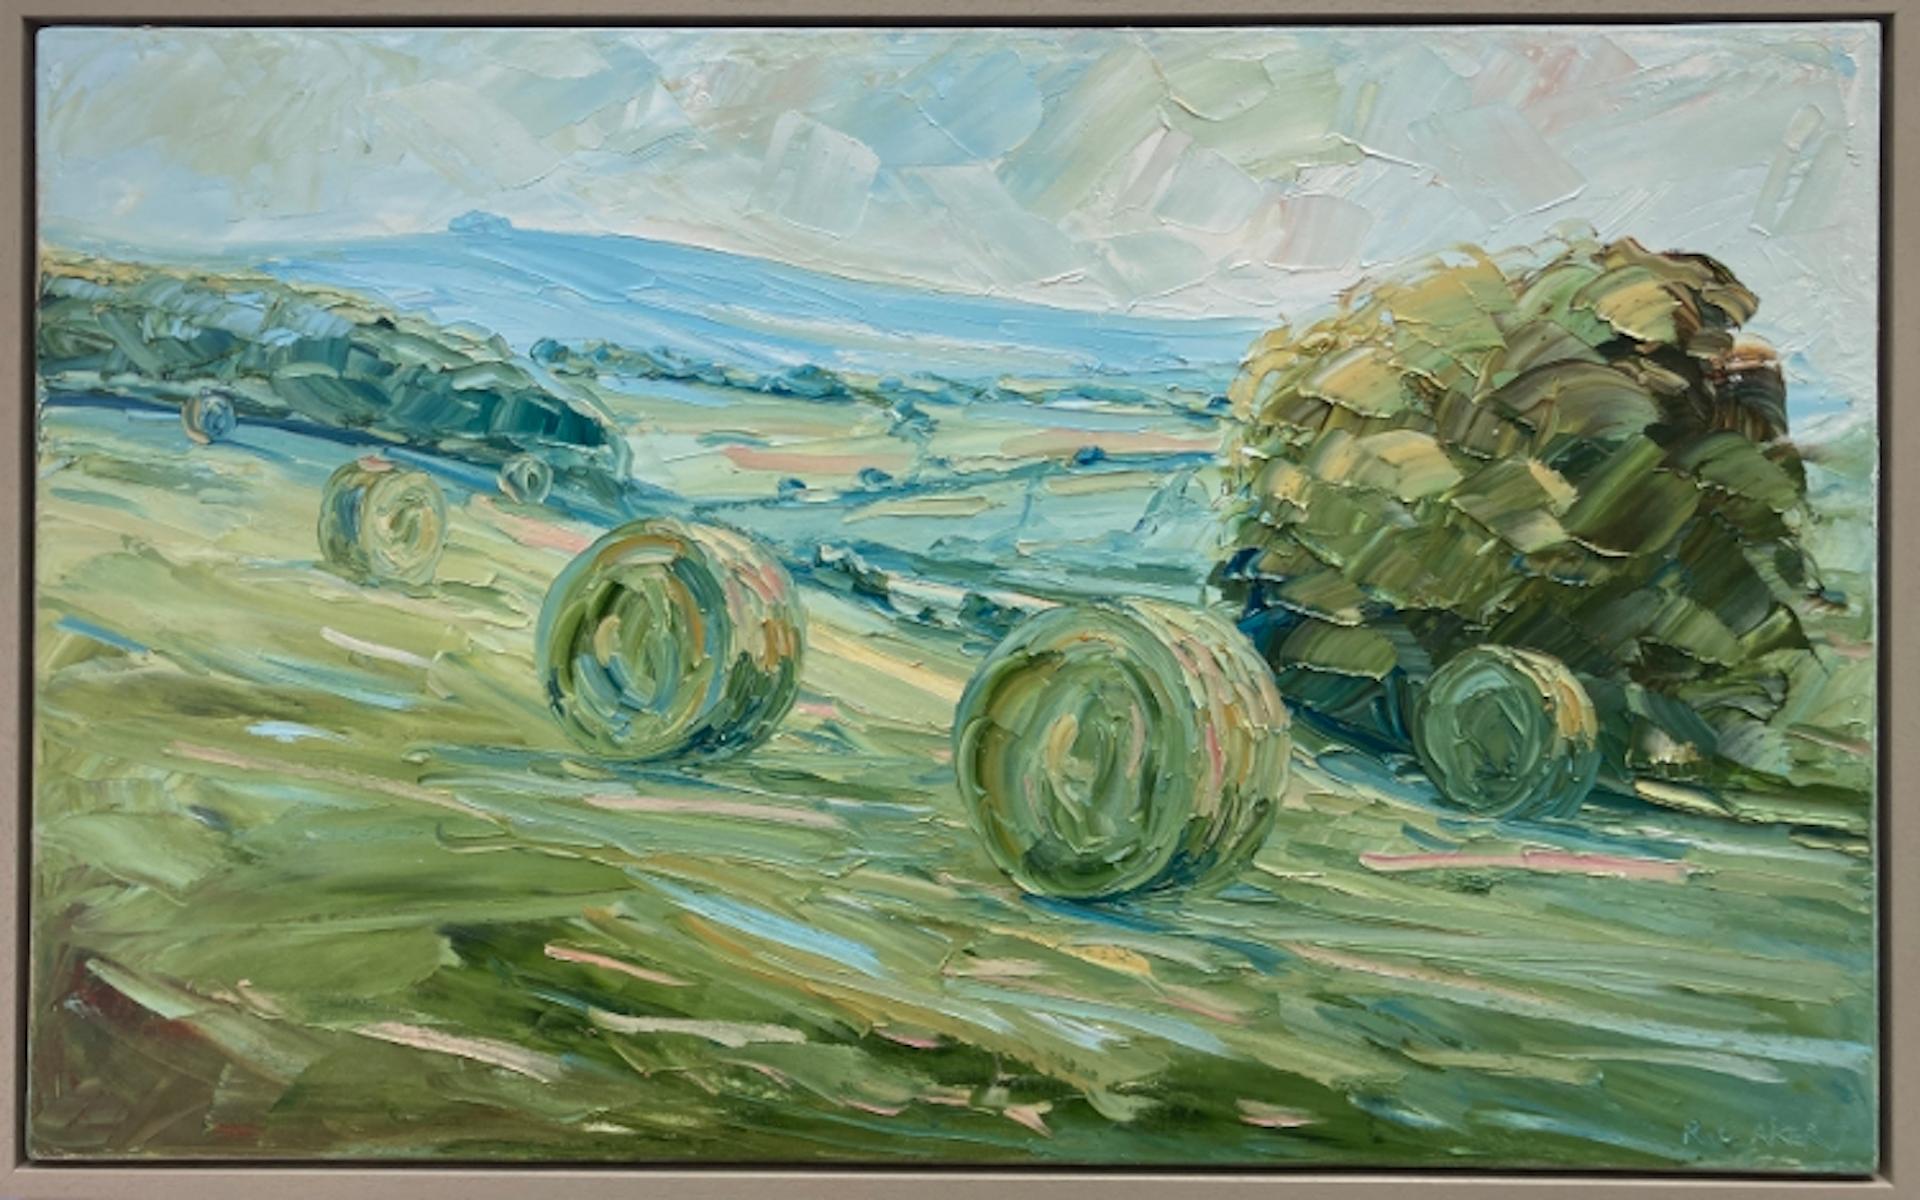 May Hill by Rupert Aker, Contemporary Art, Oil painting, Landscape art. 